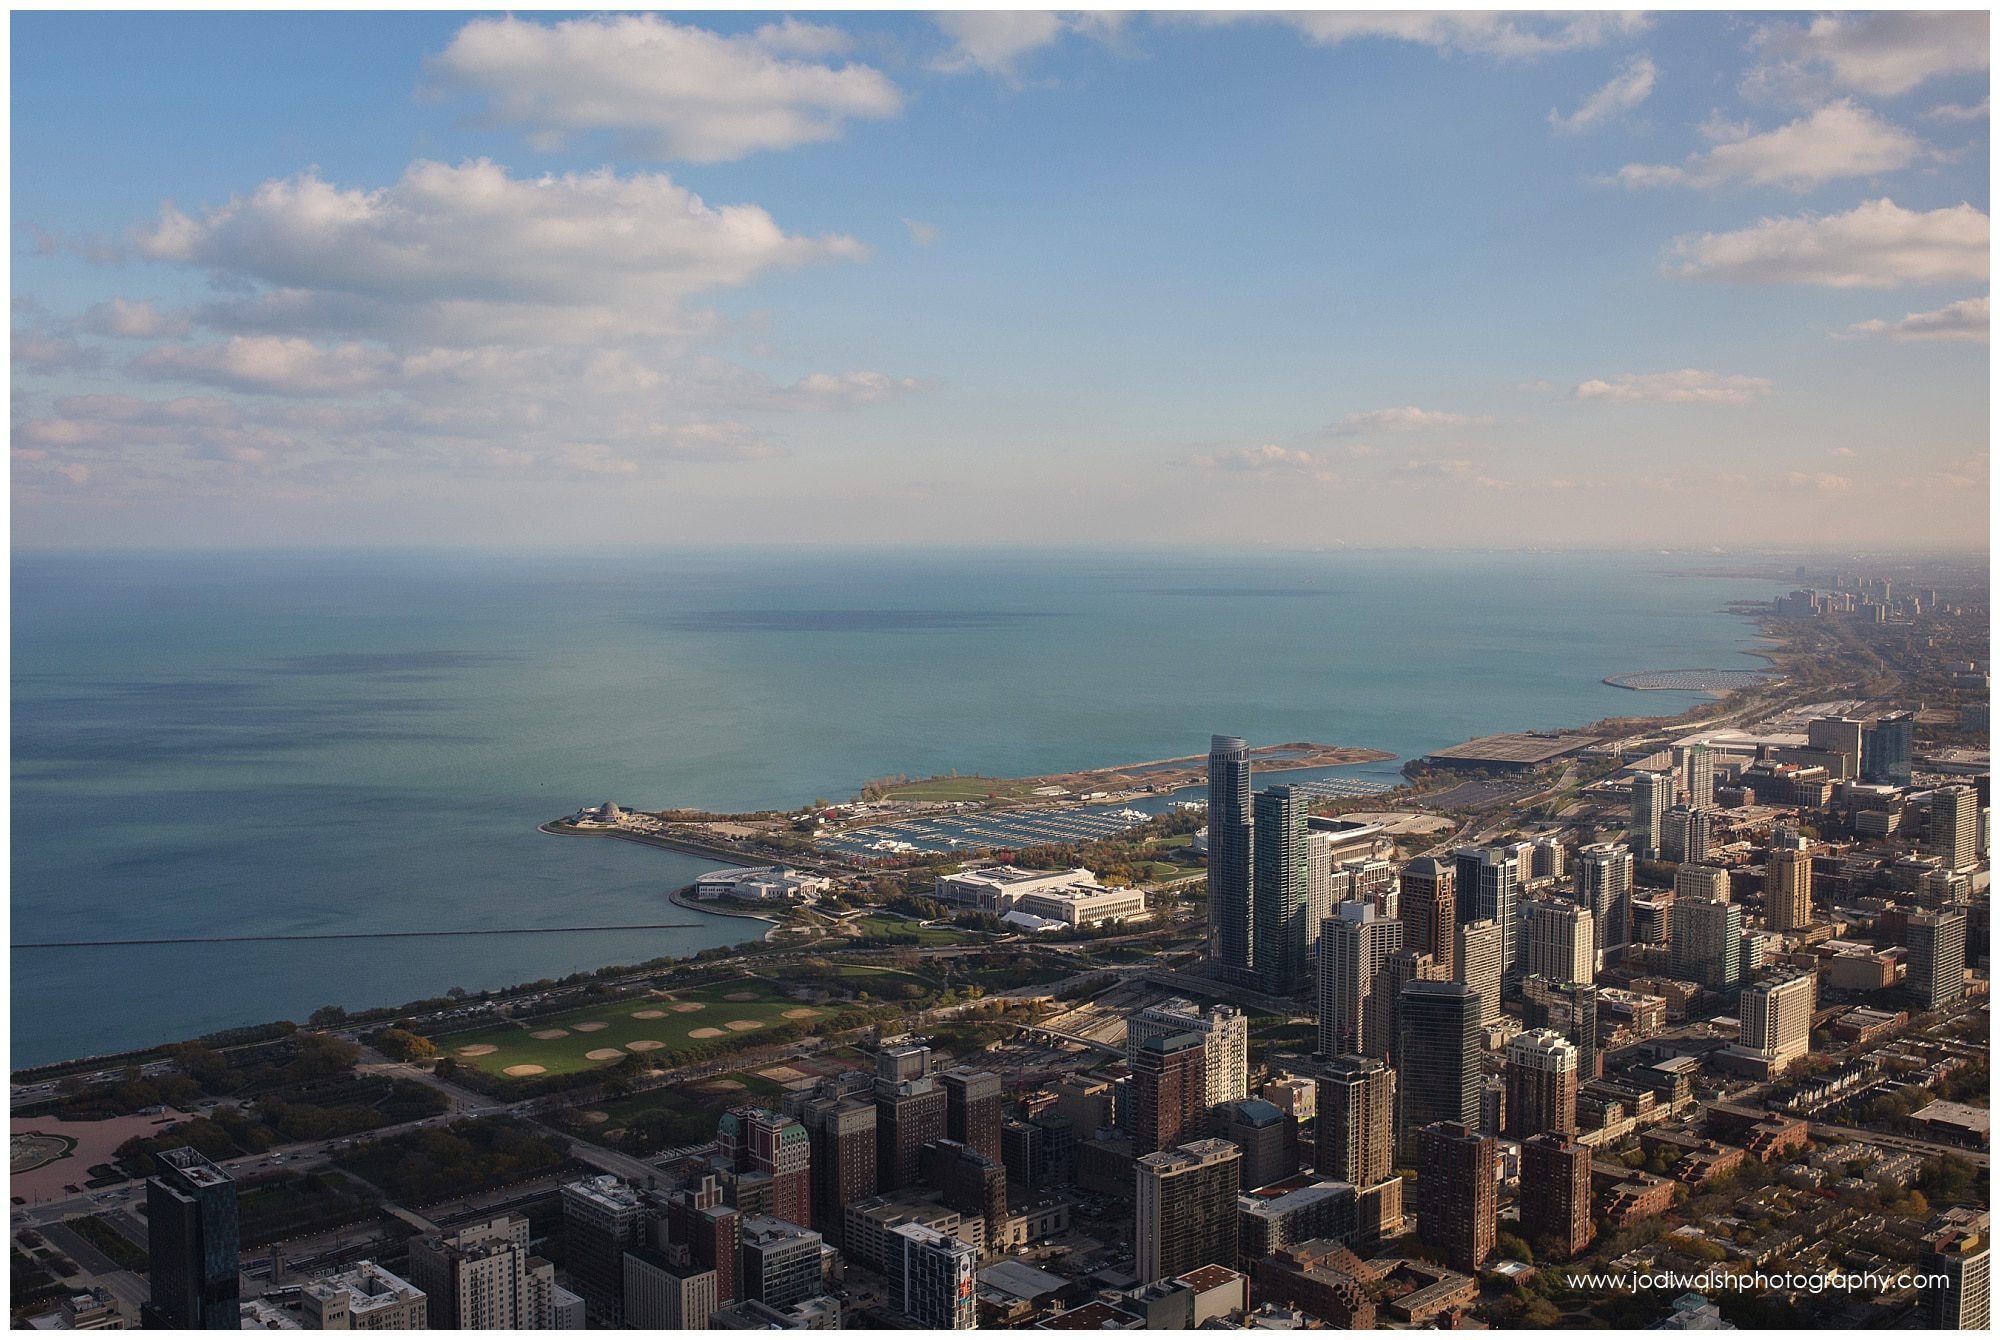 Lake Michigan view from Willis Tower, Chicago